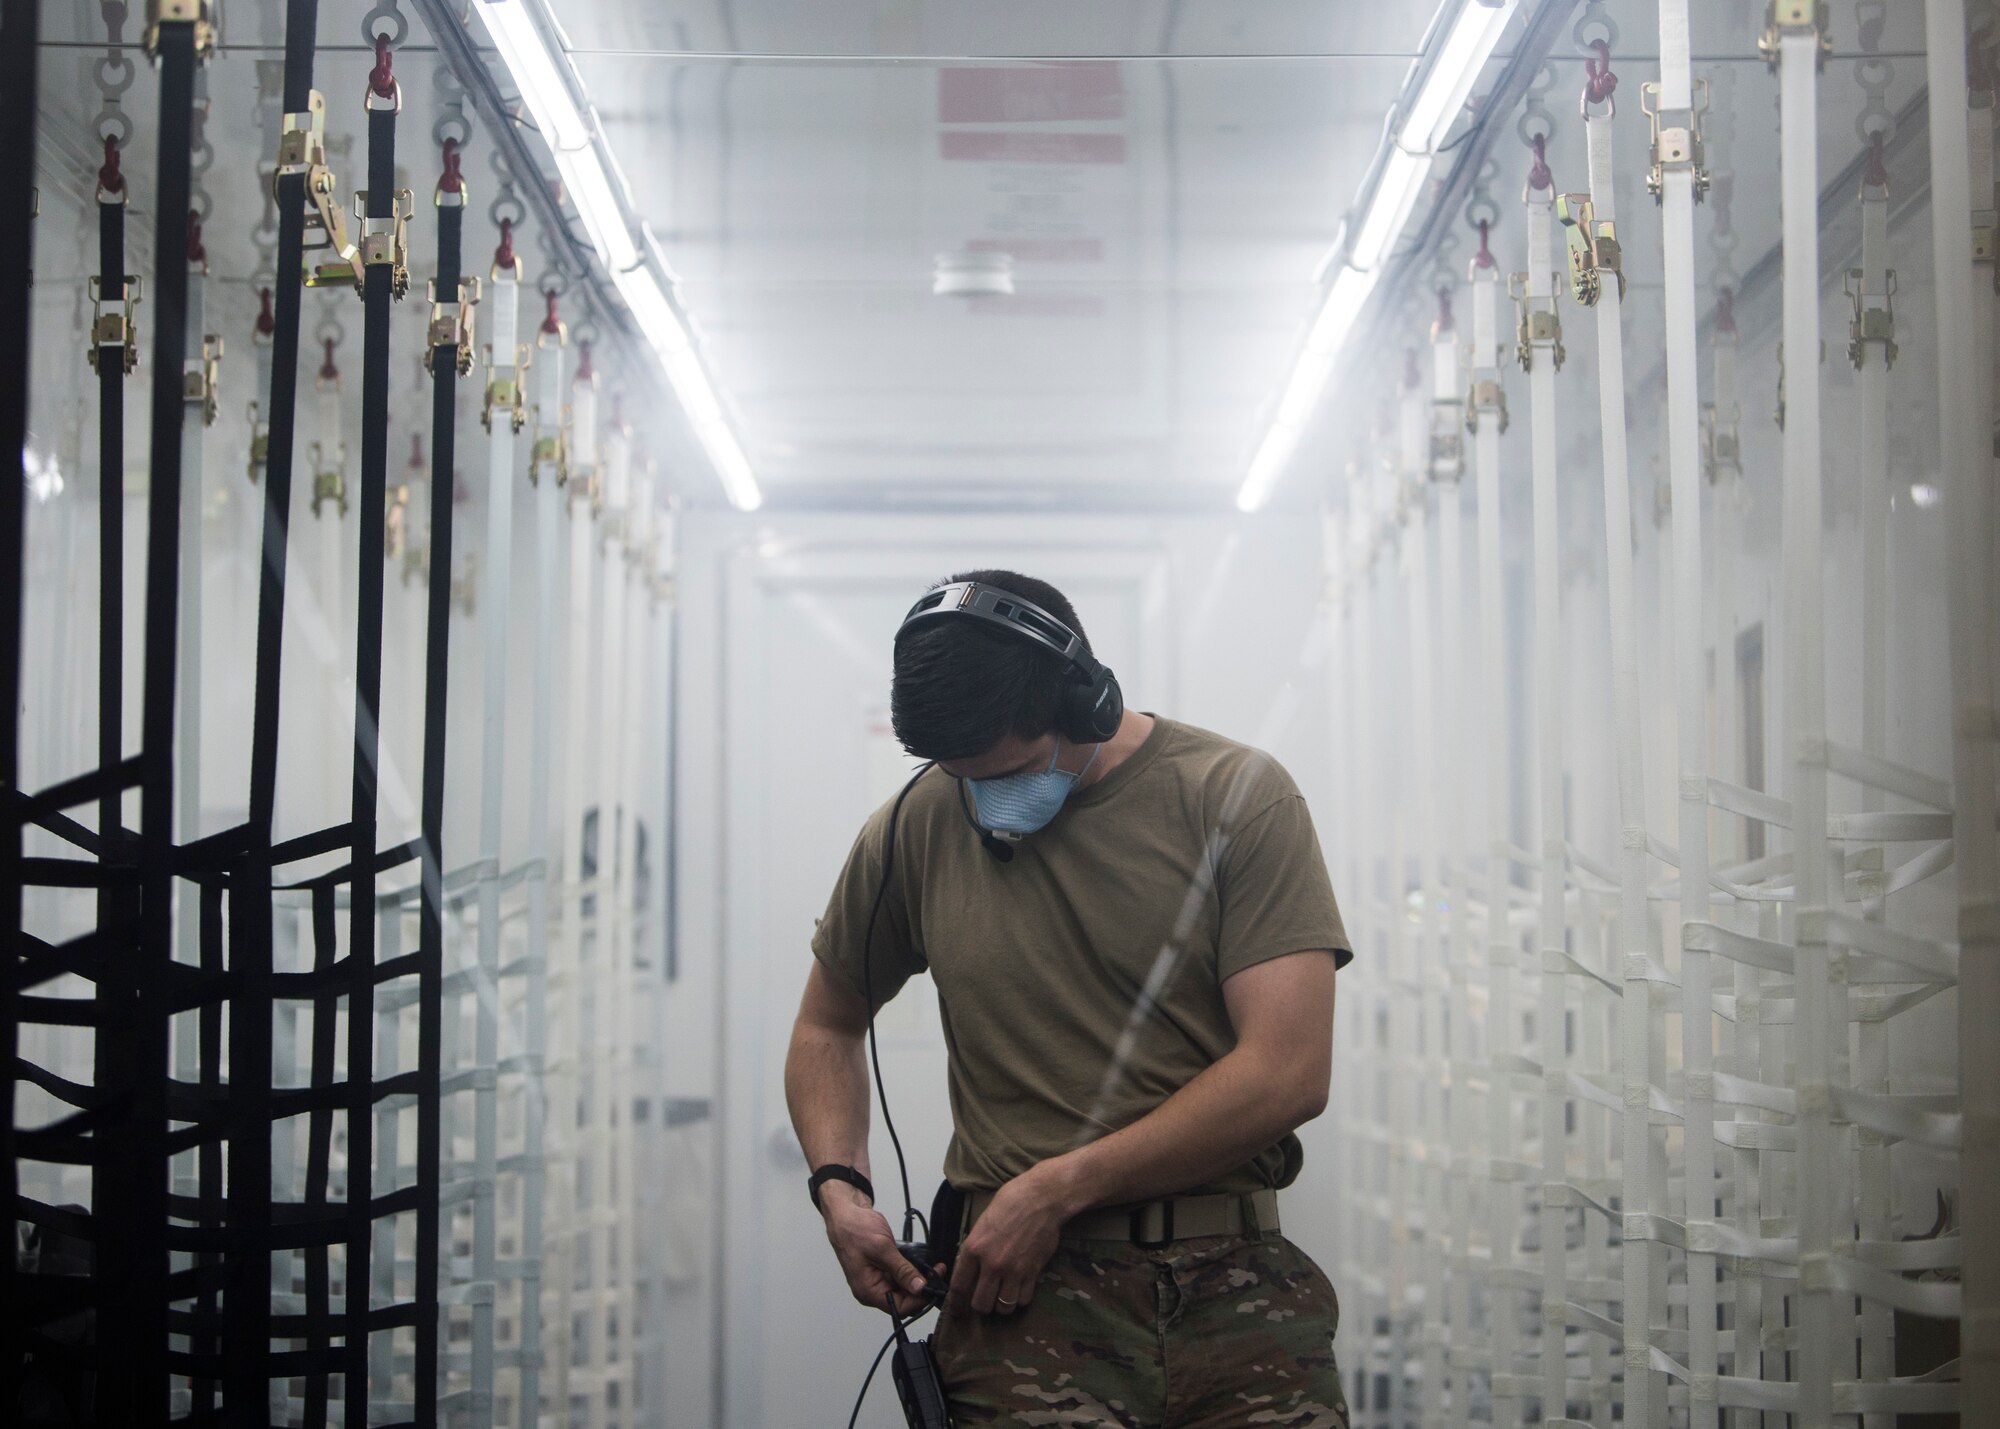 U.S. Air Force Capt. Conor Favo, 28th Test and Evaluation Squadron division chief, adjusts the settings of his headset during the first in-flight testing of a Negatively Pressurized Conex prototype on a C-17 Globemaster III, April 30, 2020. The NPC was rapidly developed and designed to fit inside both C-5 and C-17 aircraft to enable safe transport of up to 28 passengers, as well as teams of medical professionals to medical facilities around the globe. (U.S. Air Force photo by Staff Sgt. Chris Drzazgowski)